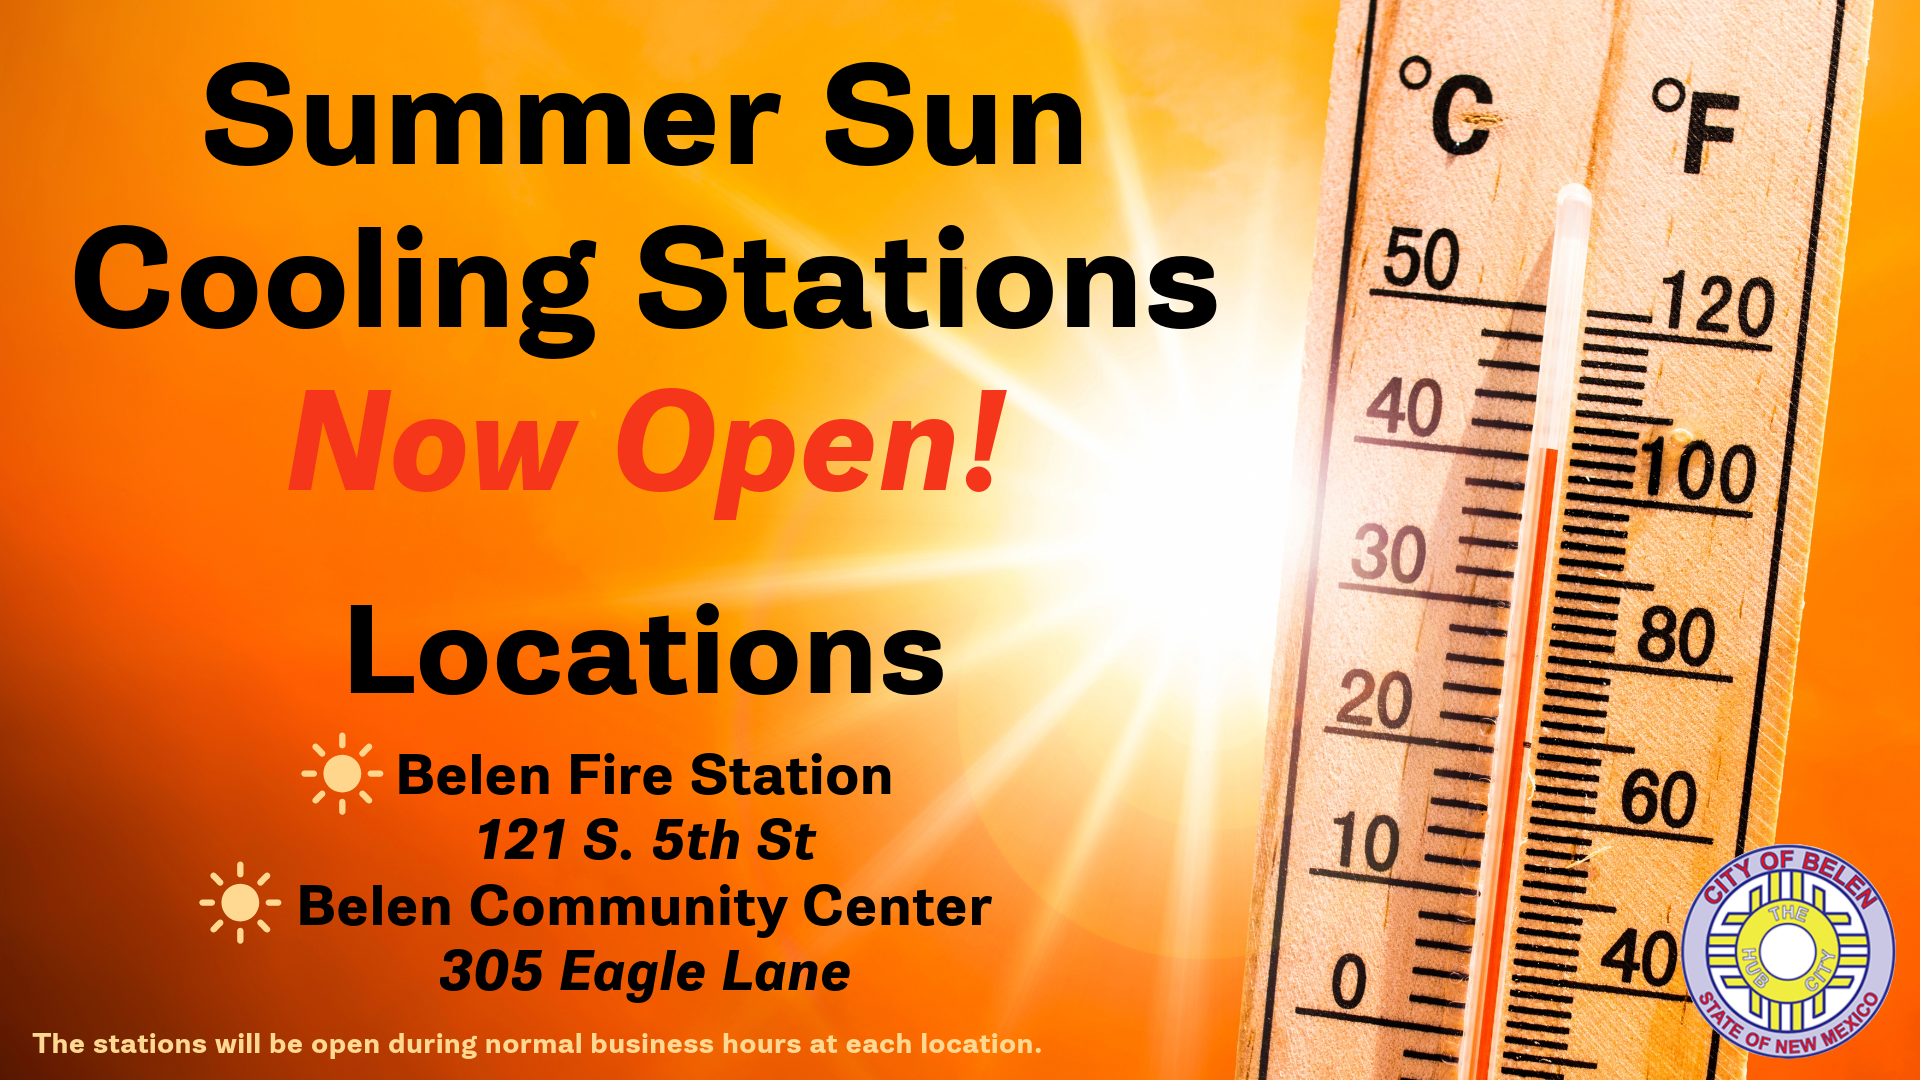 Featured image for “Summer Sun Cooling Stations”